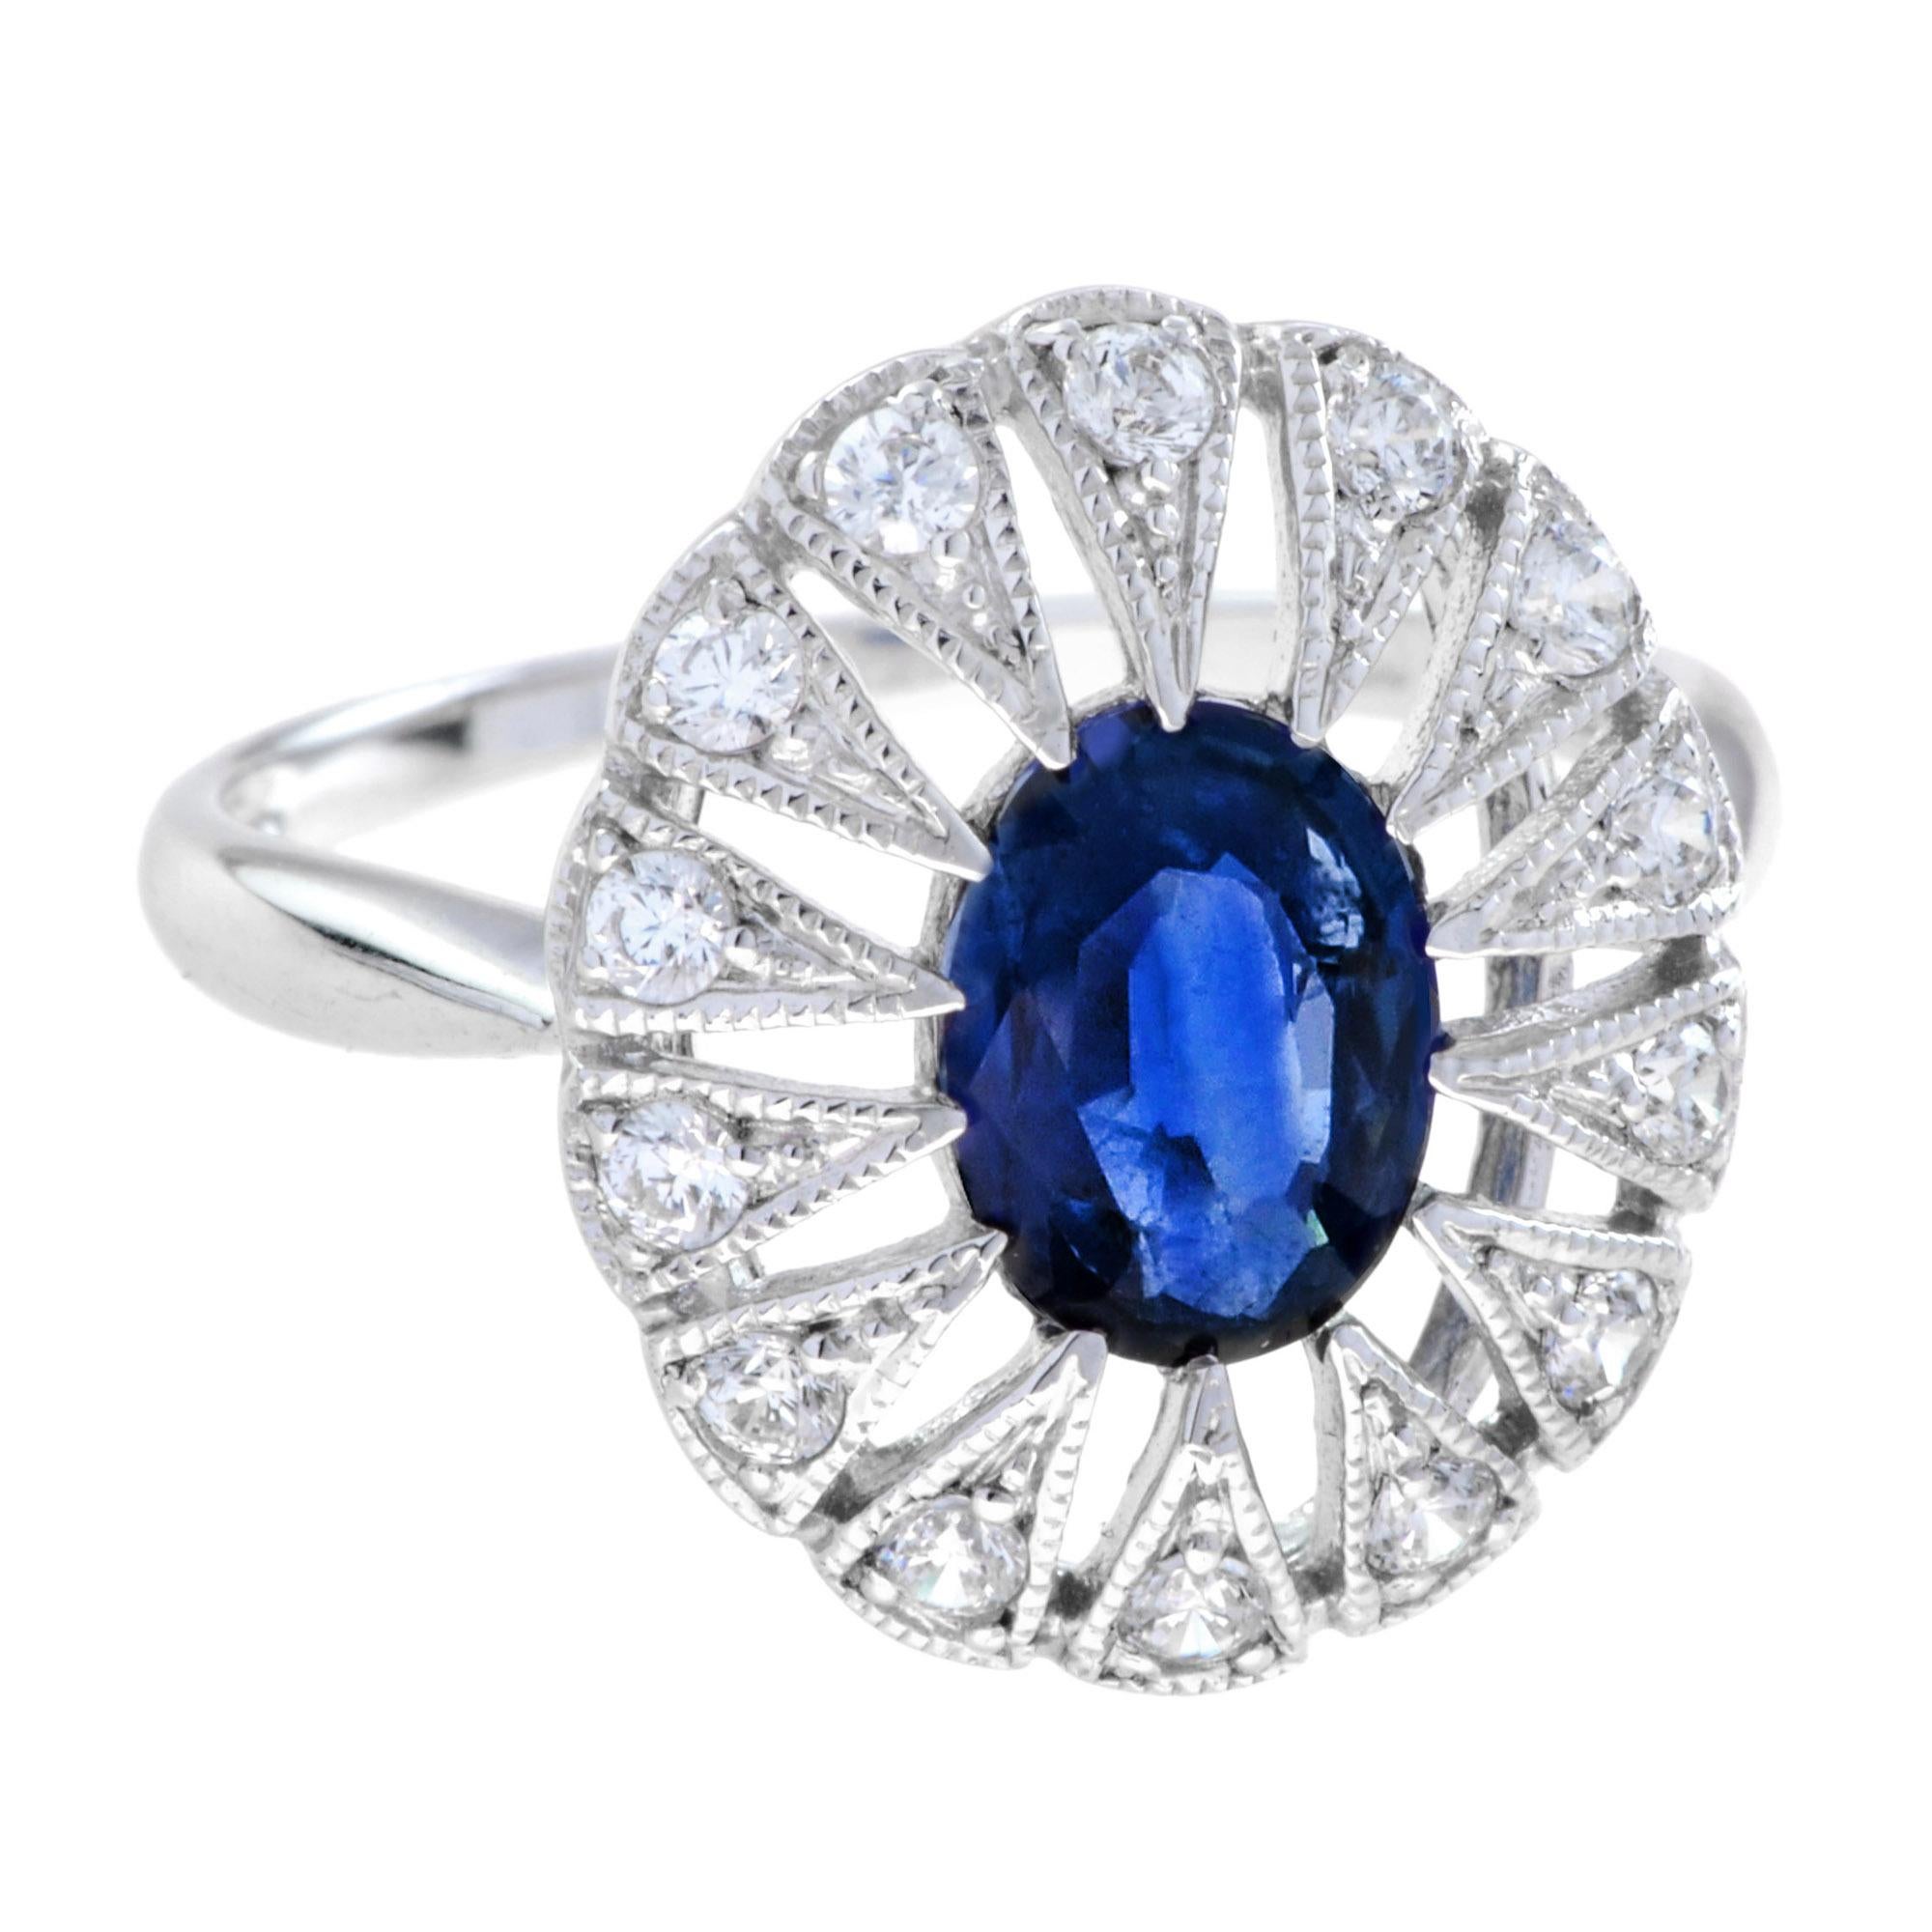 For Sale:  Oval Ceylon Sapphire with Diamond Open Work Halo Ring in 18K White Gold 3